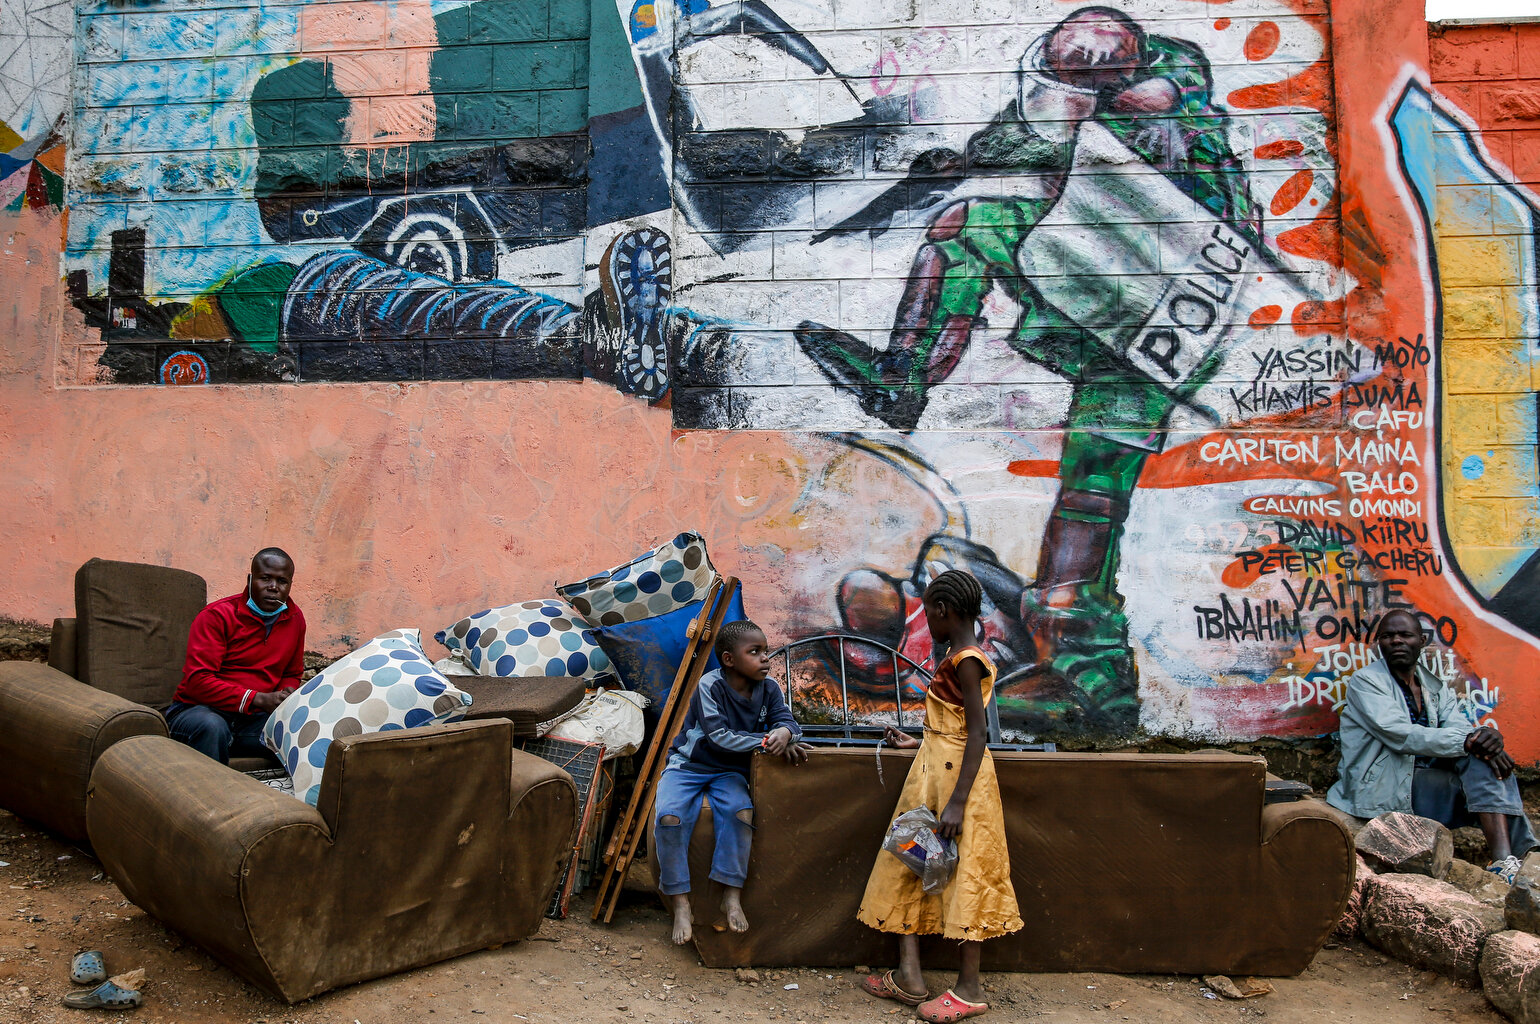  Kenyan children and men are photographed in front of a new mural painted this week showing an incident in 2016 when a Kenyan riot policeman repeatedly kicked a protester as he lay in the street, as a message about police brutality in Kenya and prote